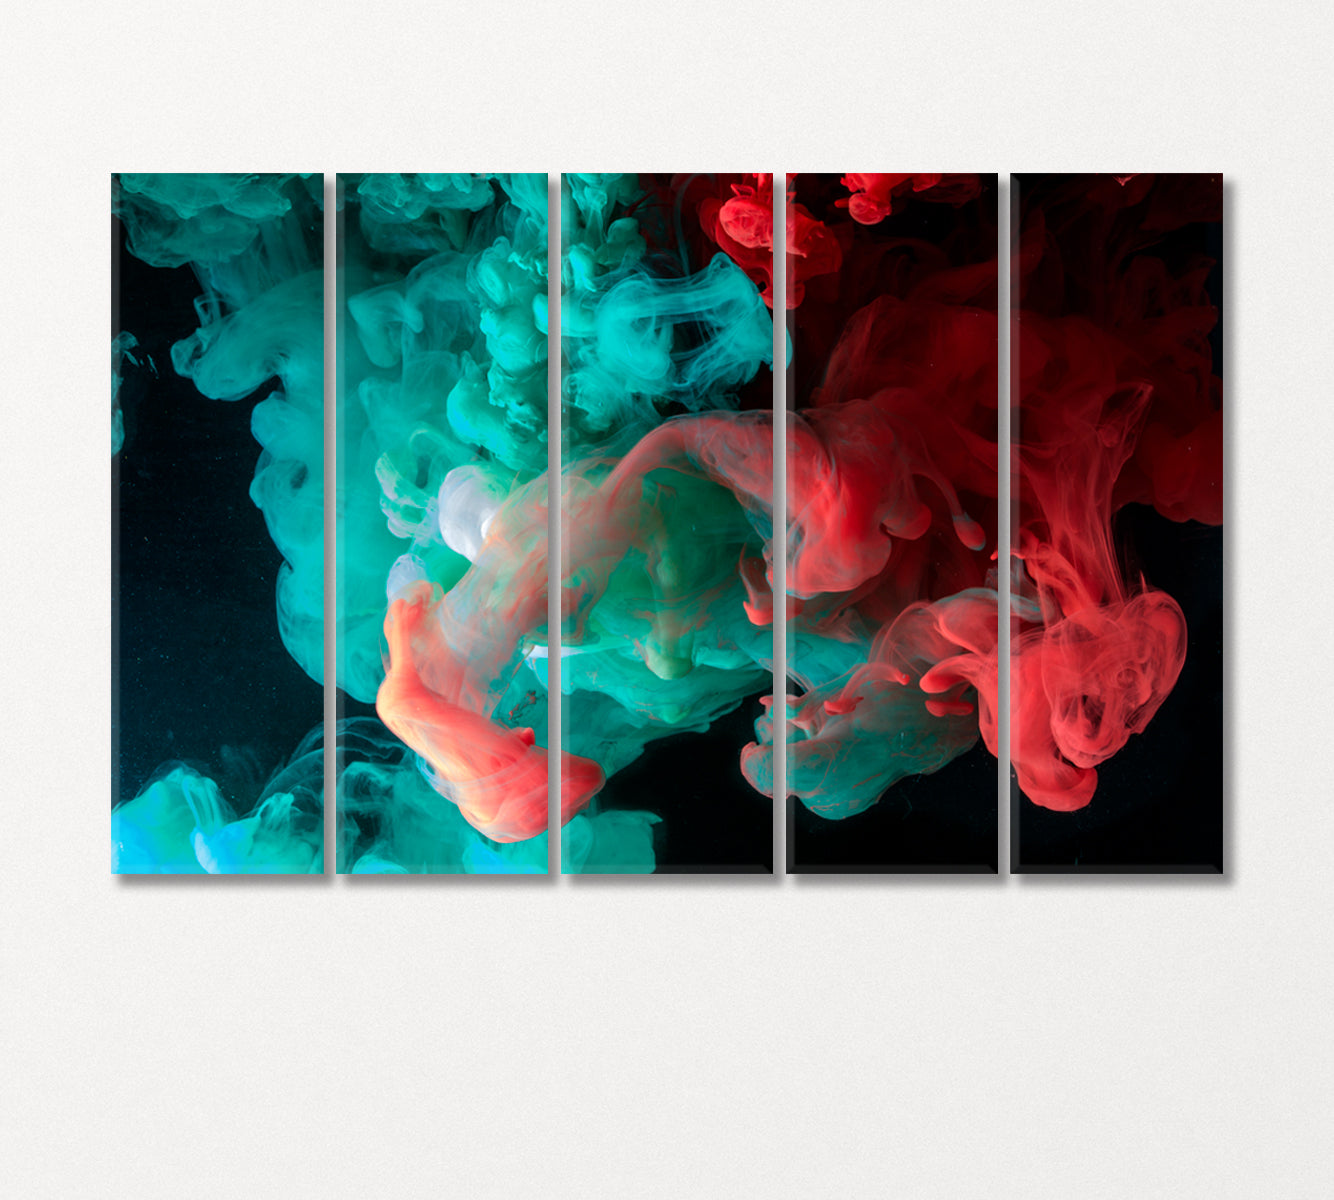 Abstract Red and Blue Smoke Canvas Print-Canvas Print-CetArt-5 Panels-36x24 inches-CetArt